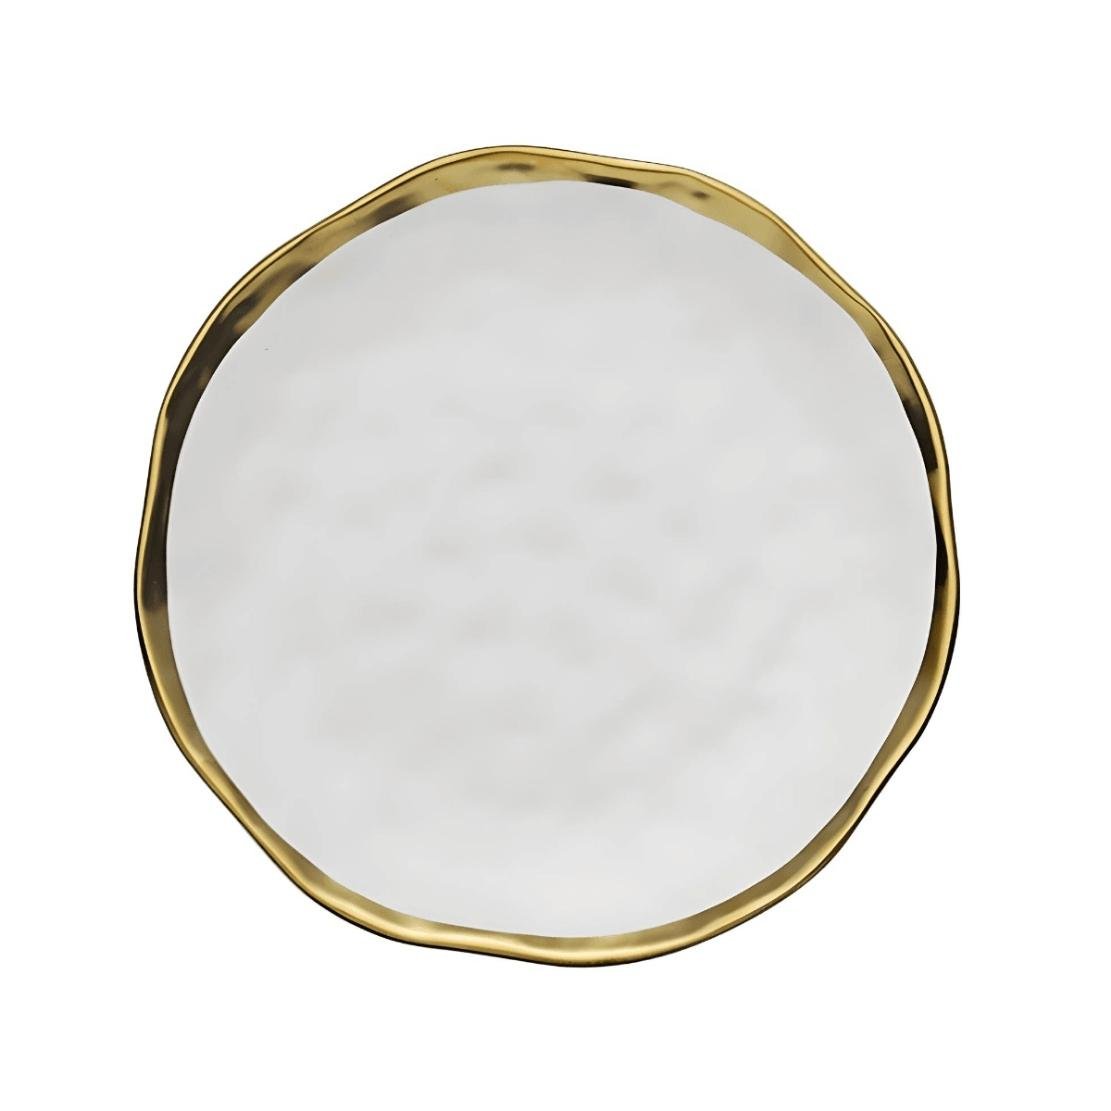 Embossed white porcelain plate with gold rim